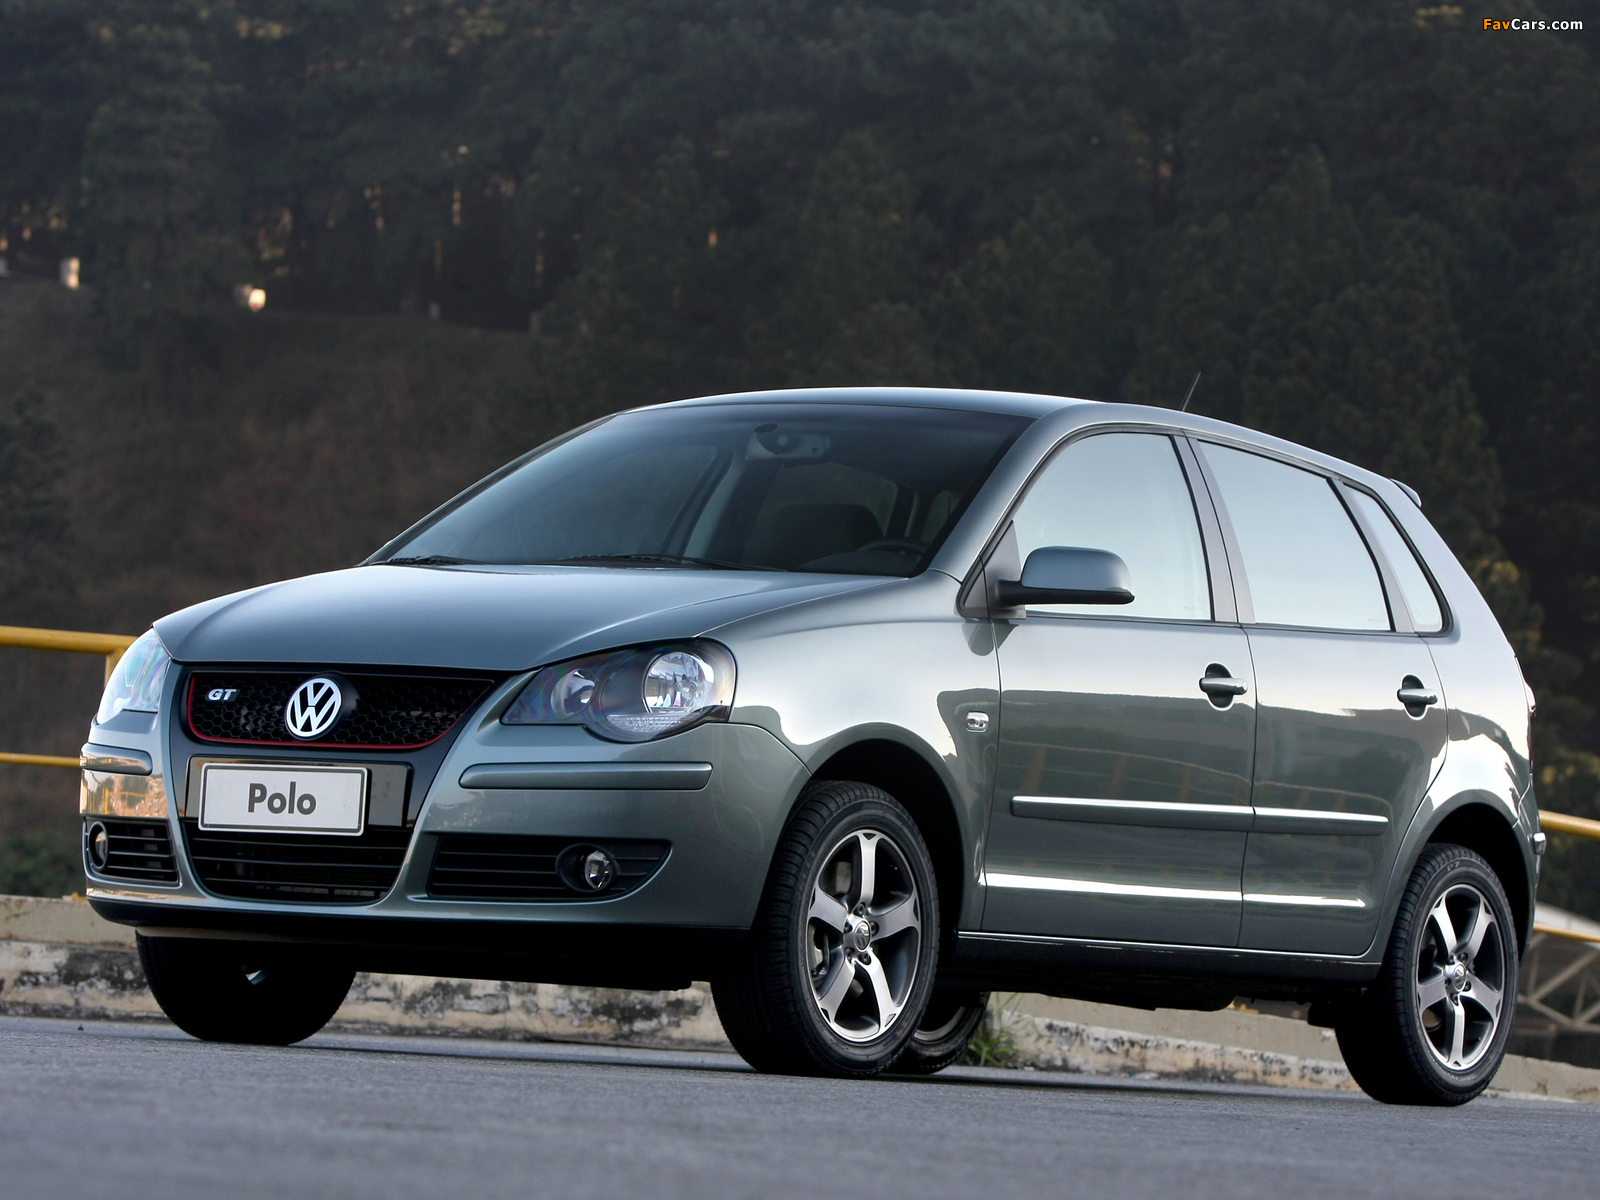 Volkswagen Polo GT (Typ 9N3) 2008 pictures (1600 x 1200)